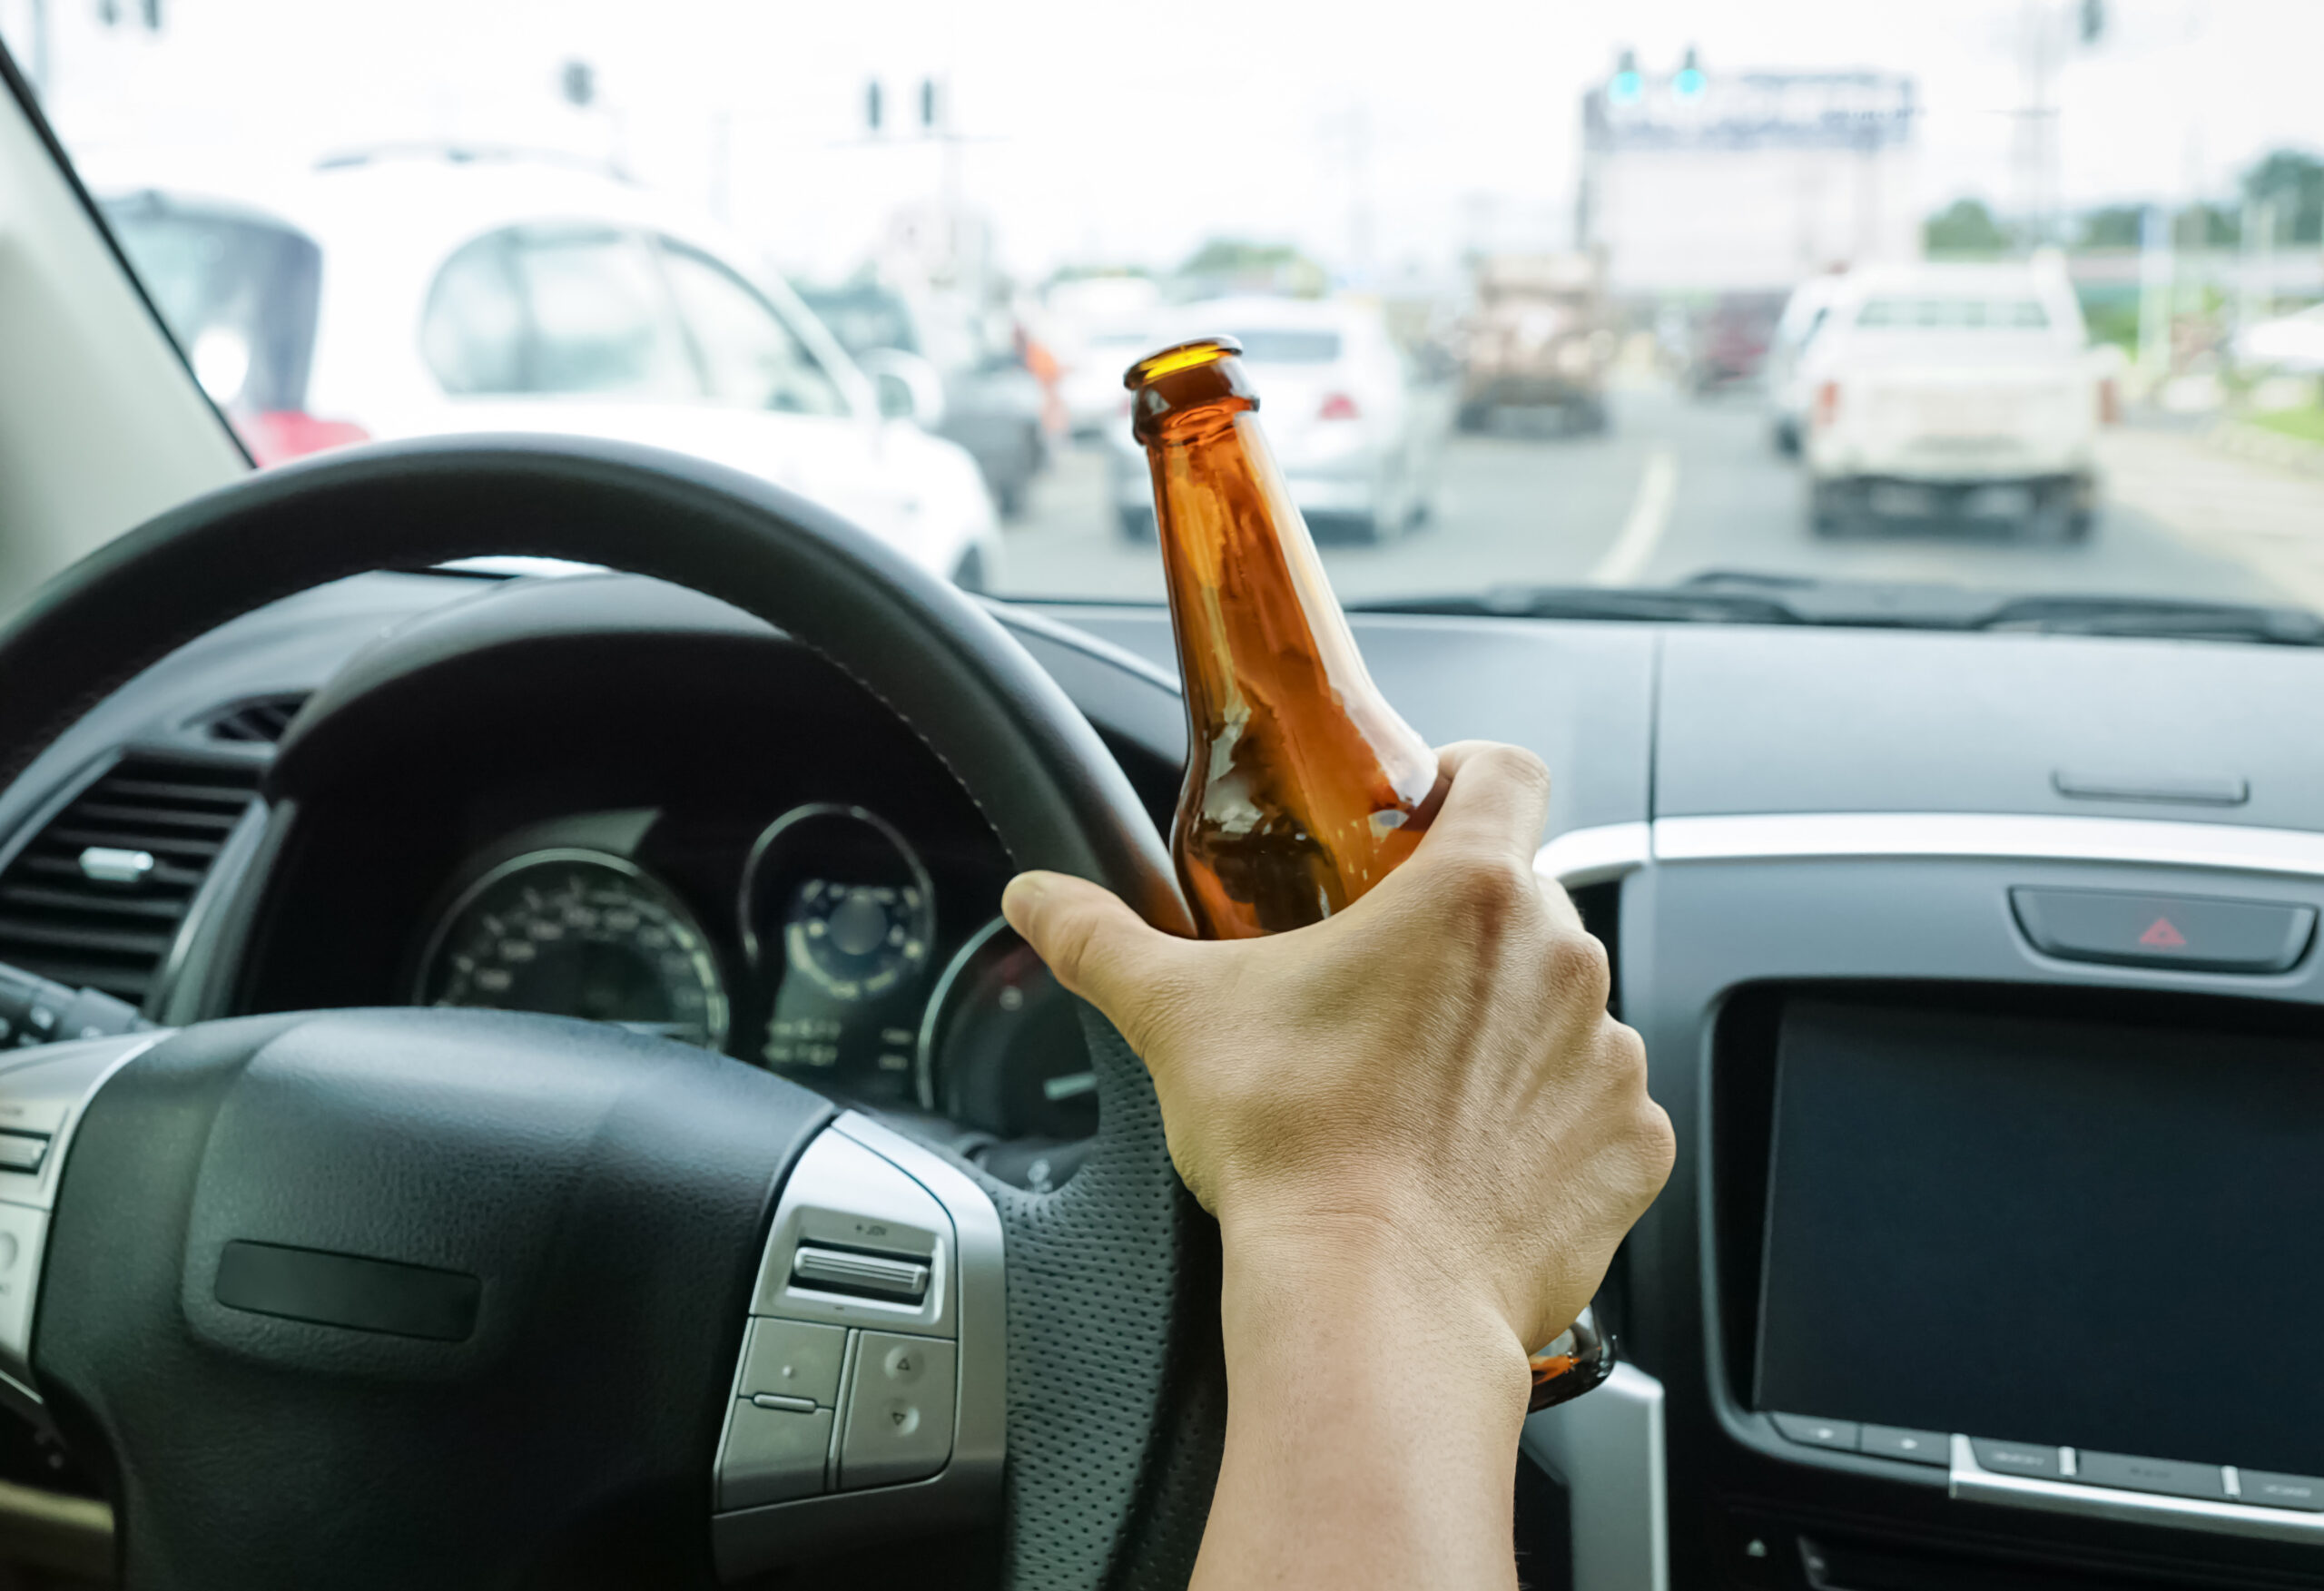 Seller Beware: You’re Liable for DUI Accidents!